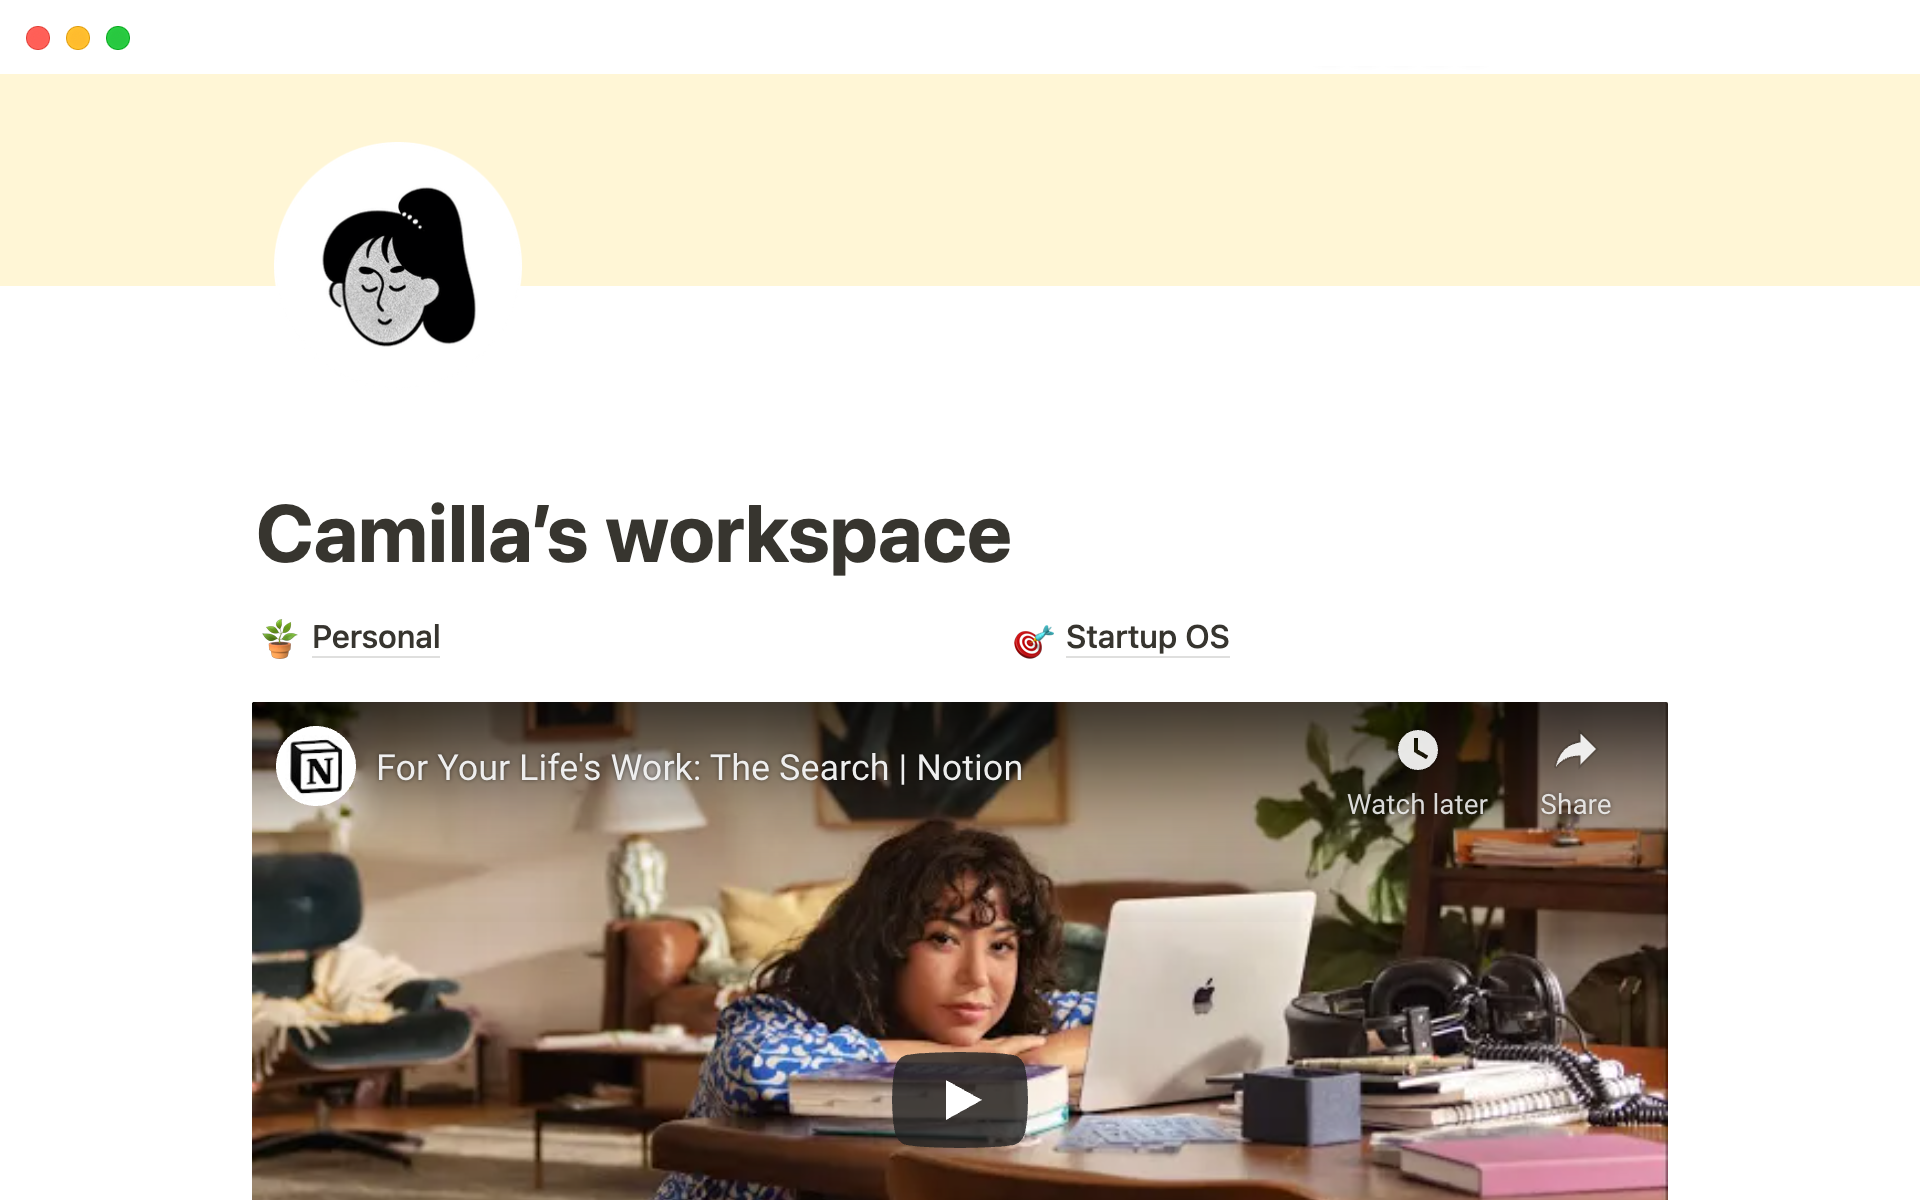 Camilla represents all the founders nurturing a growing startup as well as their own healthy personal lives. Explore her workspace, then make your own!